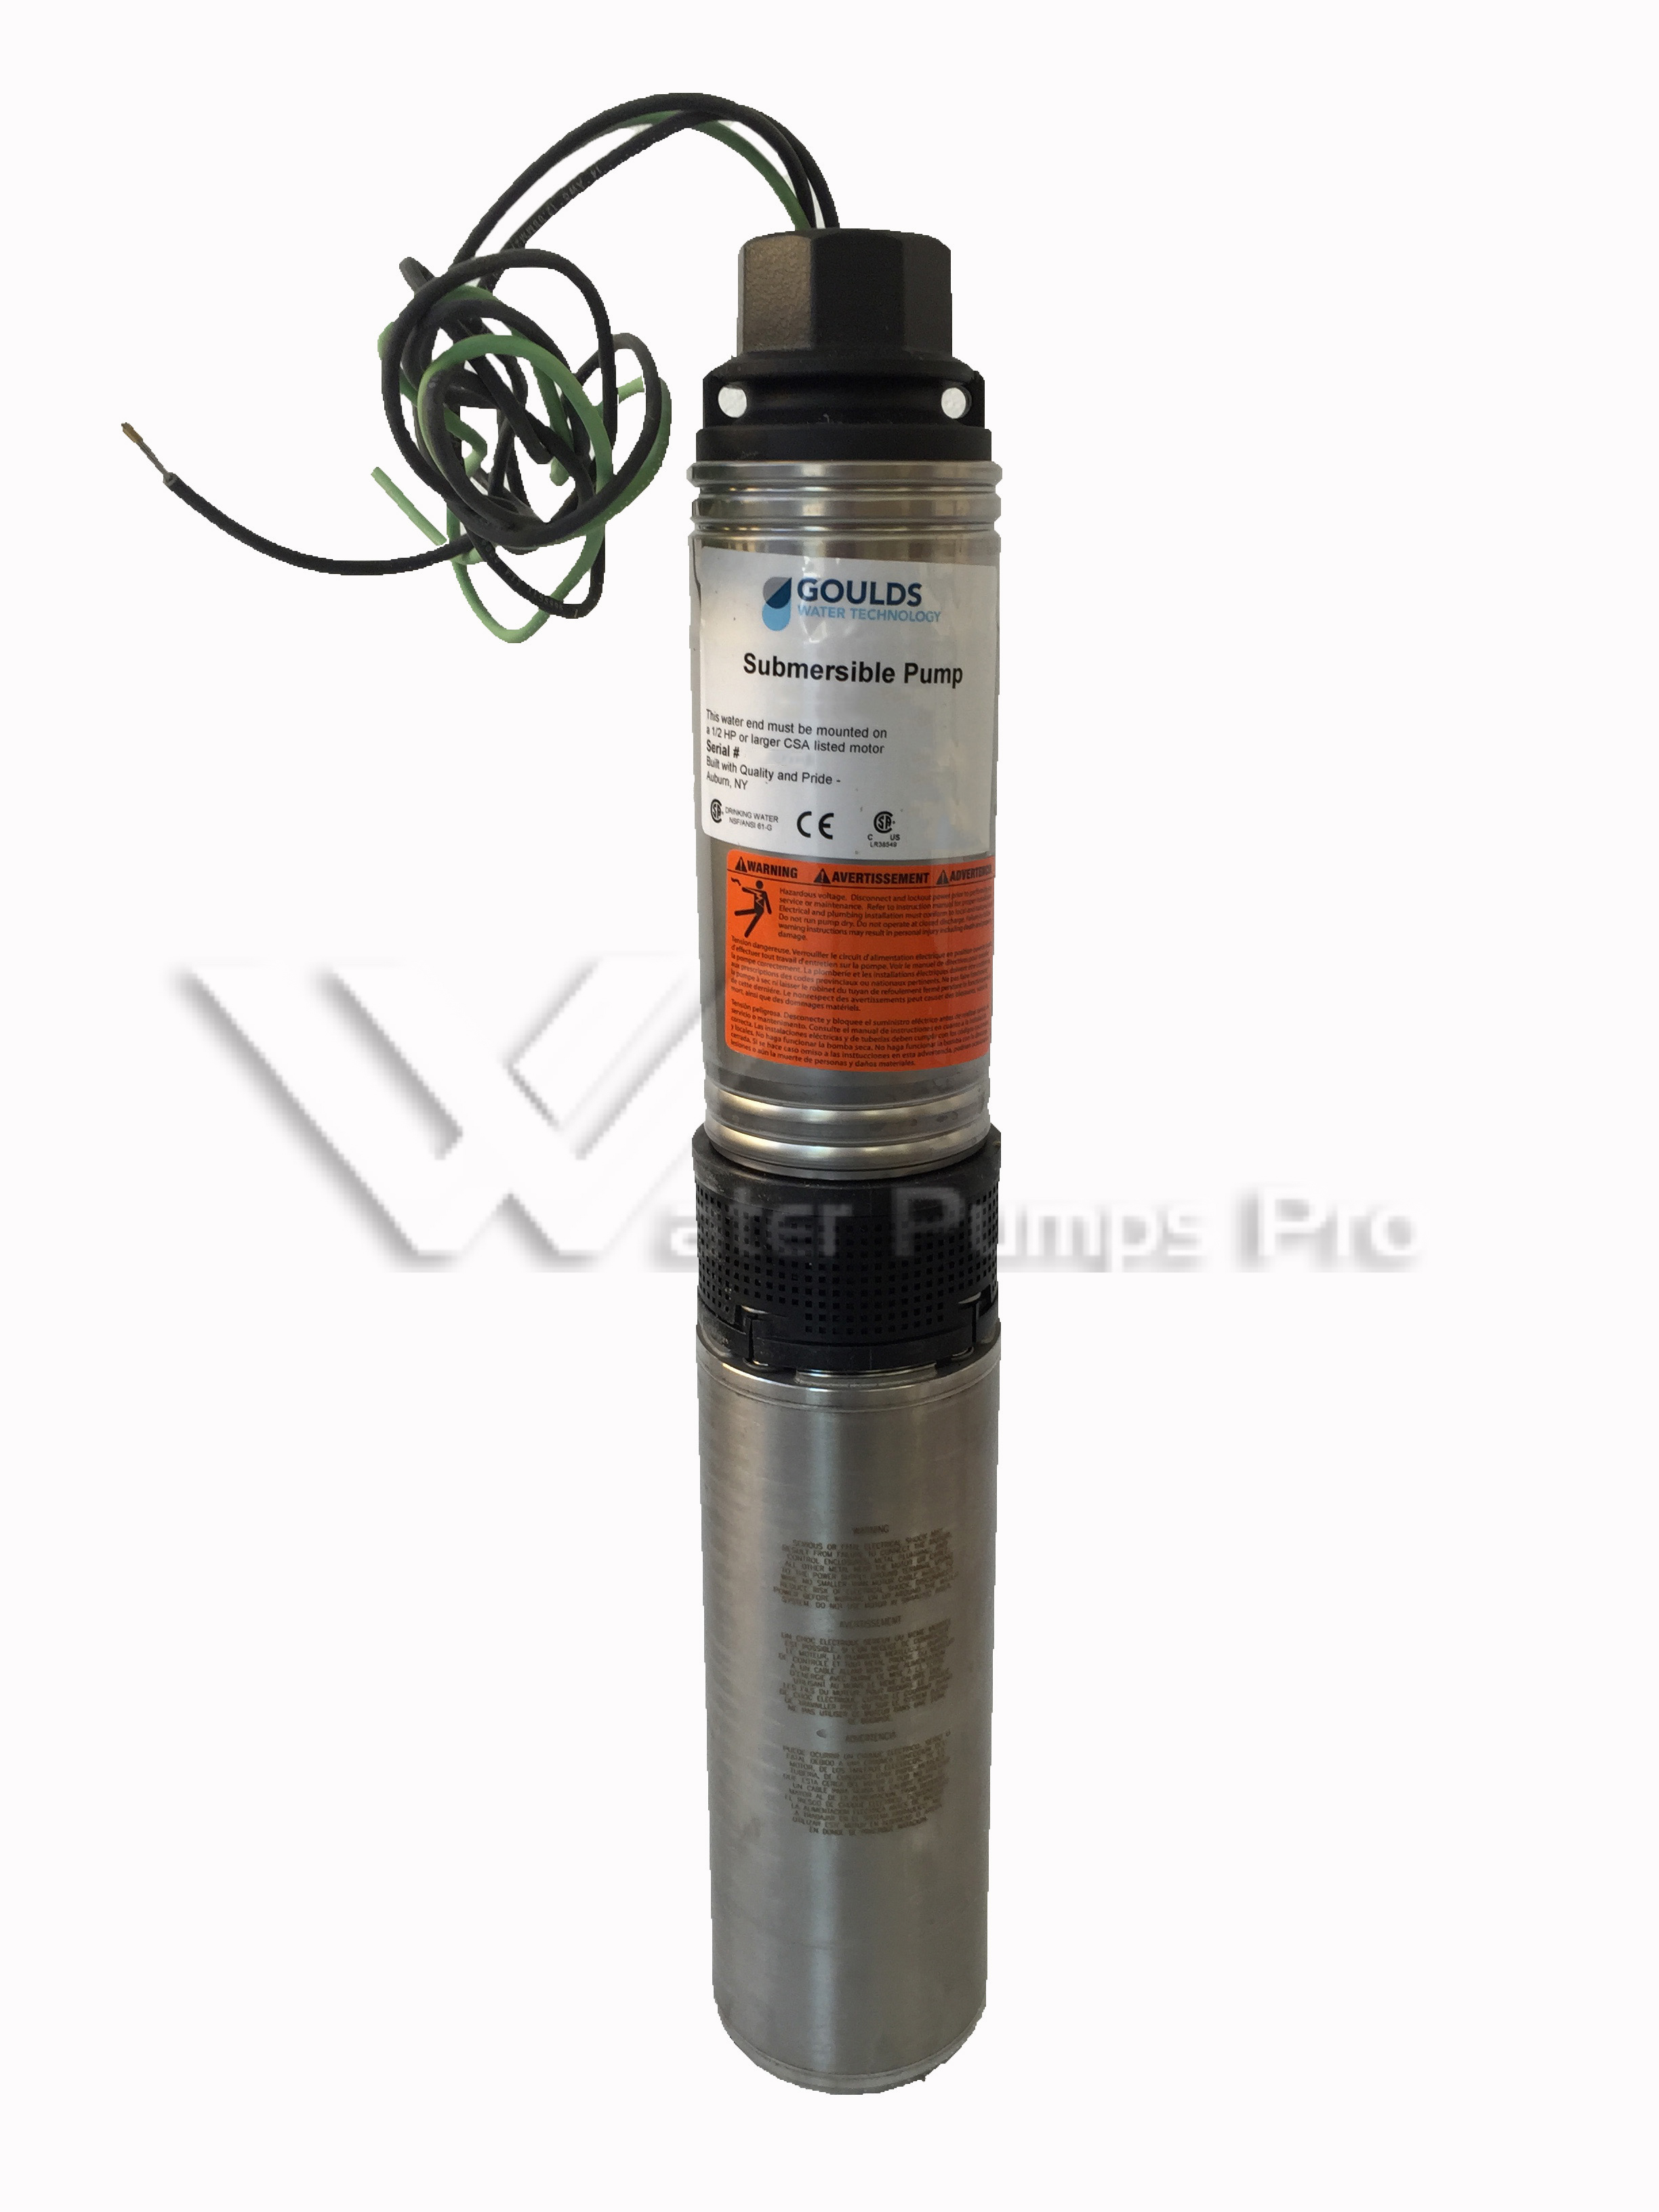 Goulds 25HS10422C Submersible Water Well Pump 1HP 230V 2Wire